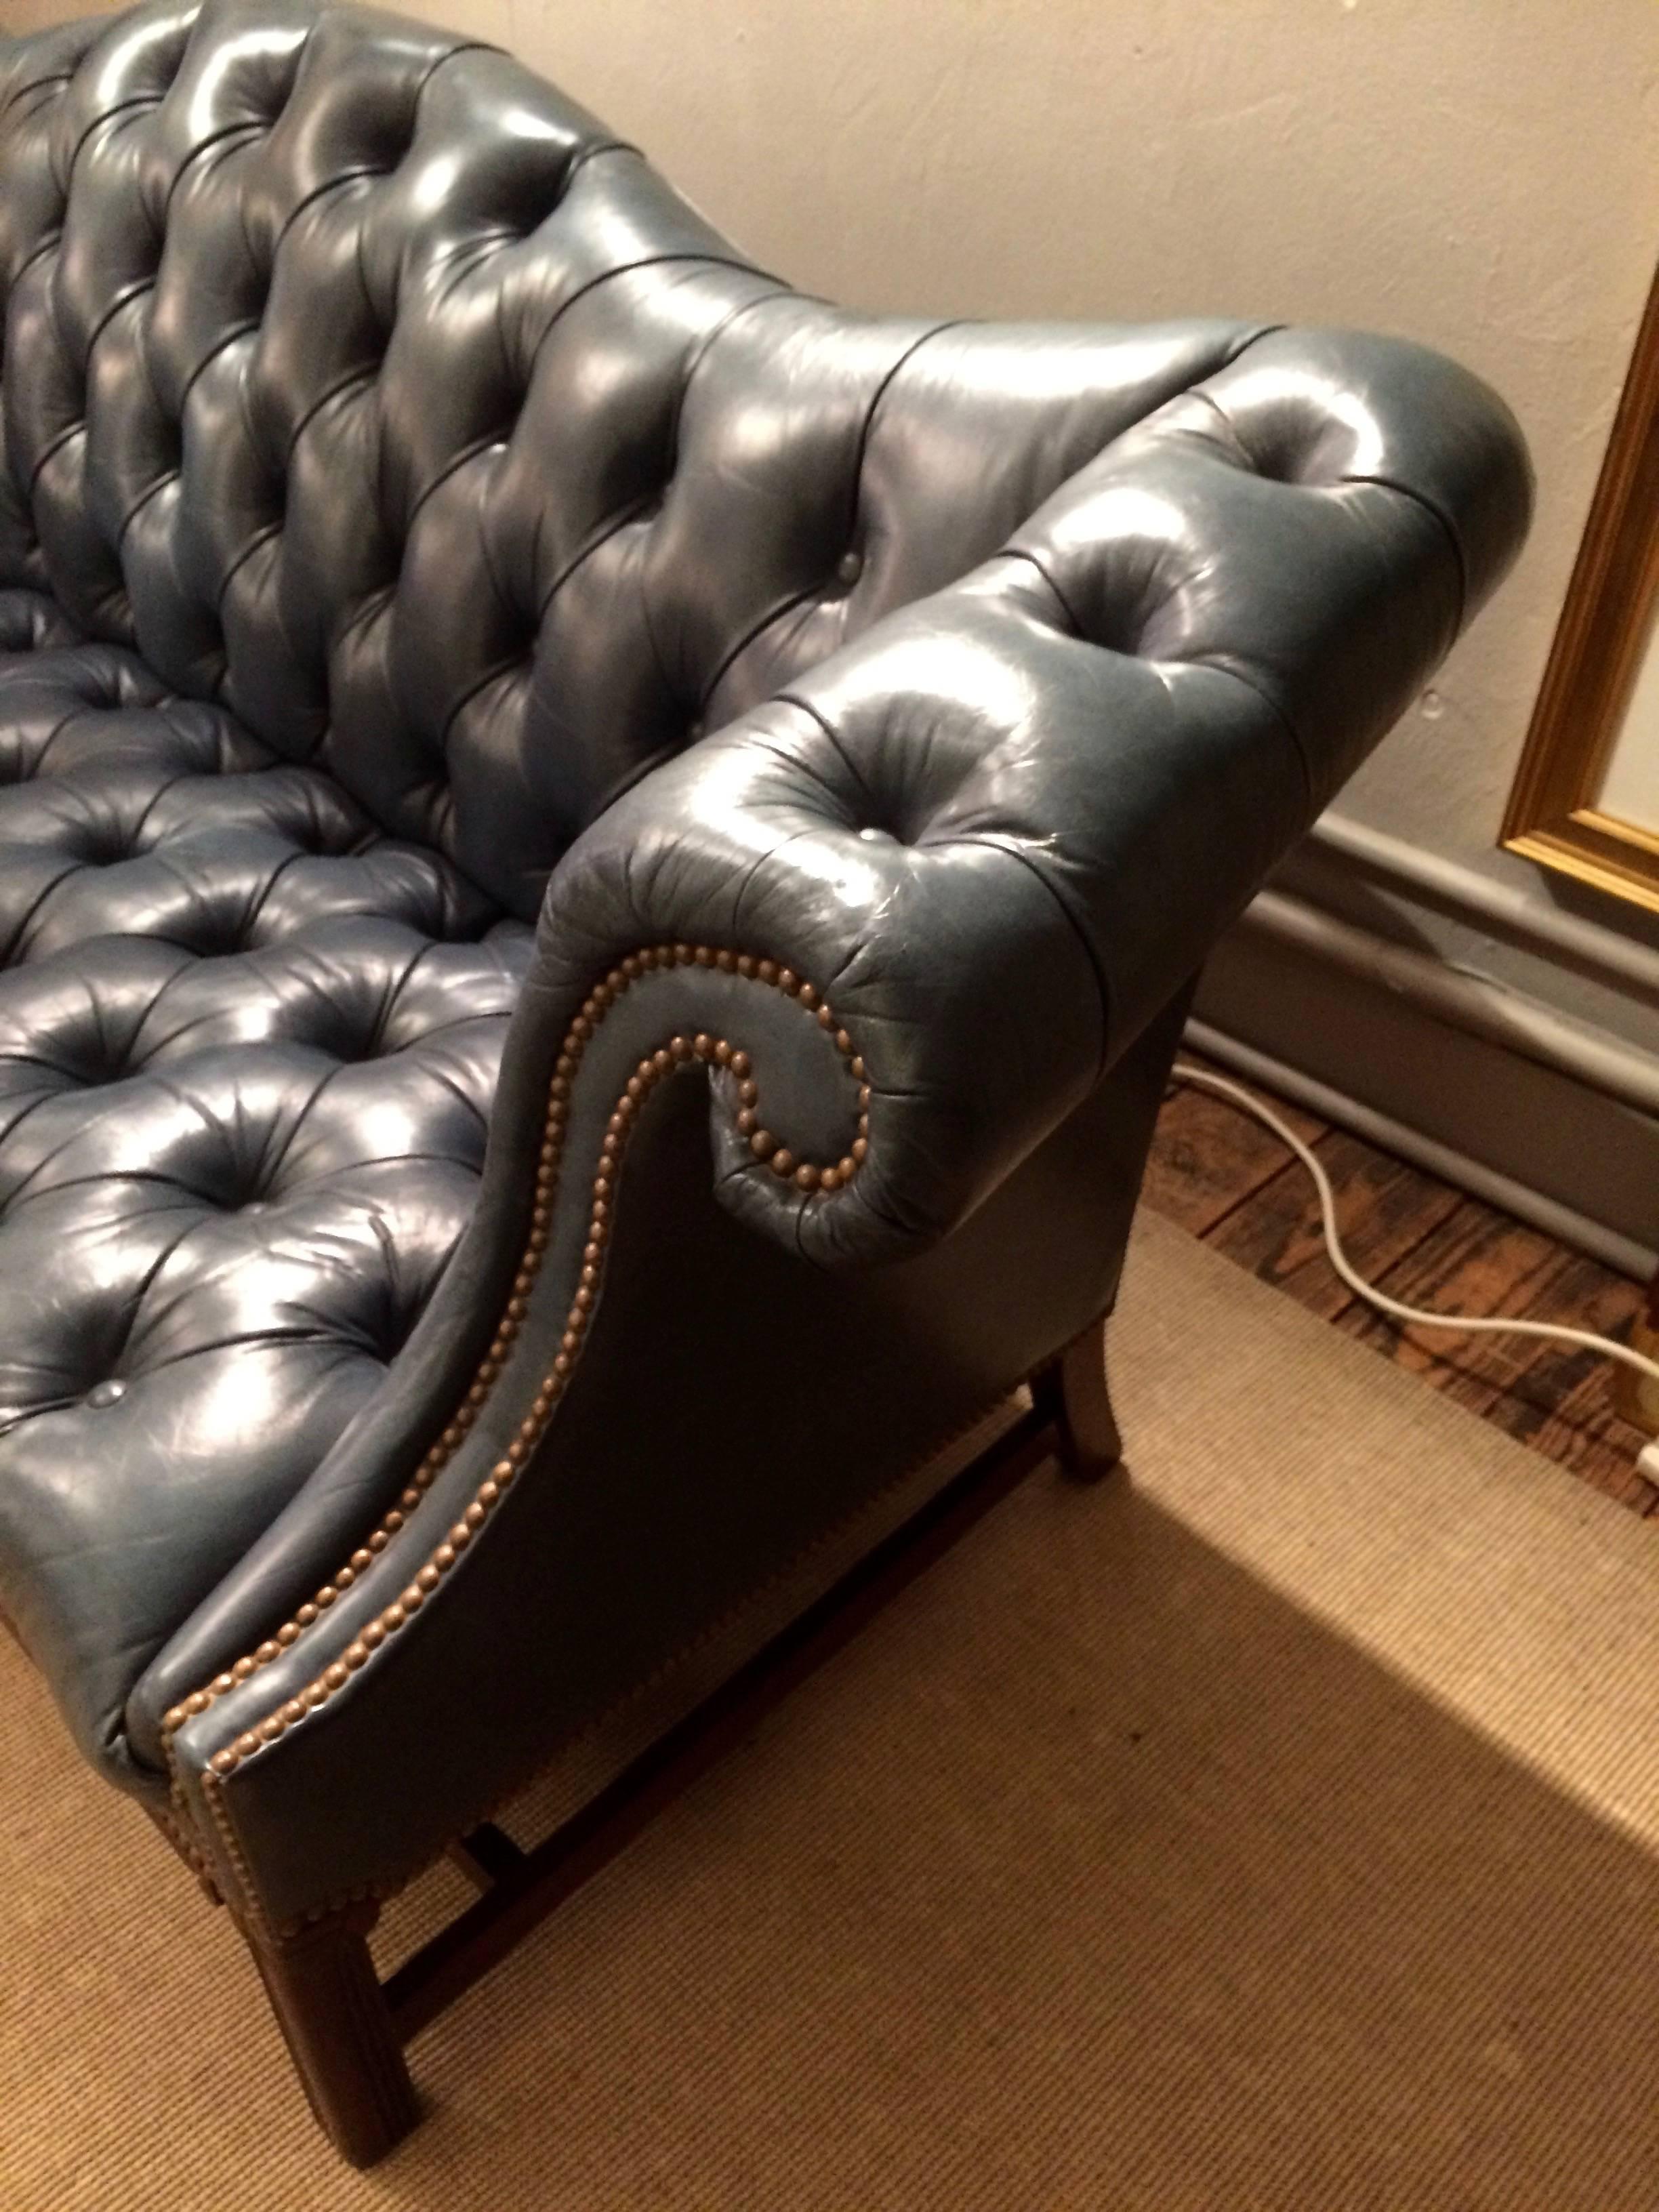 Great looking Chesterfield sofa with curlicue arms and carved mahogany Chippendale style base. Leather is a soft tufted grey blue with natural vintage patina, finished with brass nailheads.